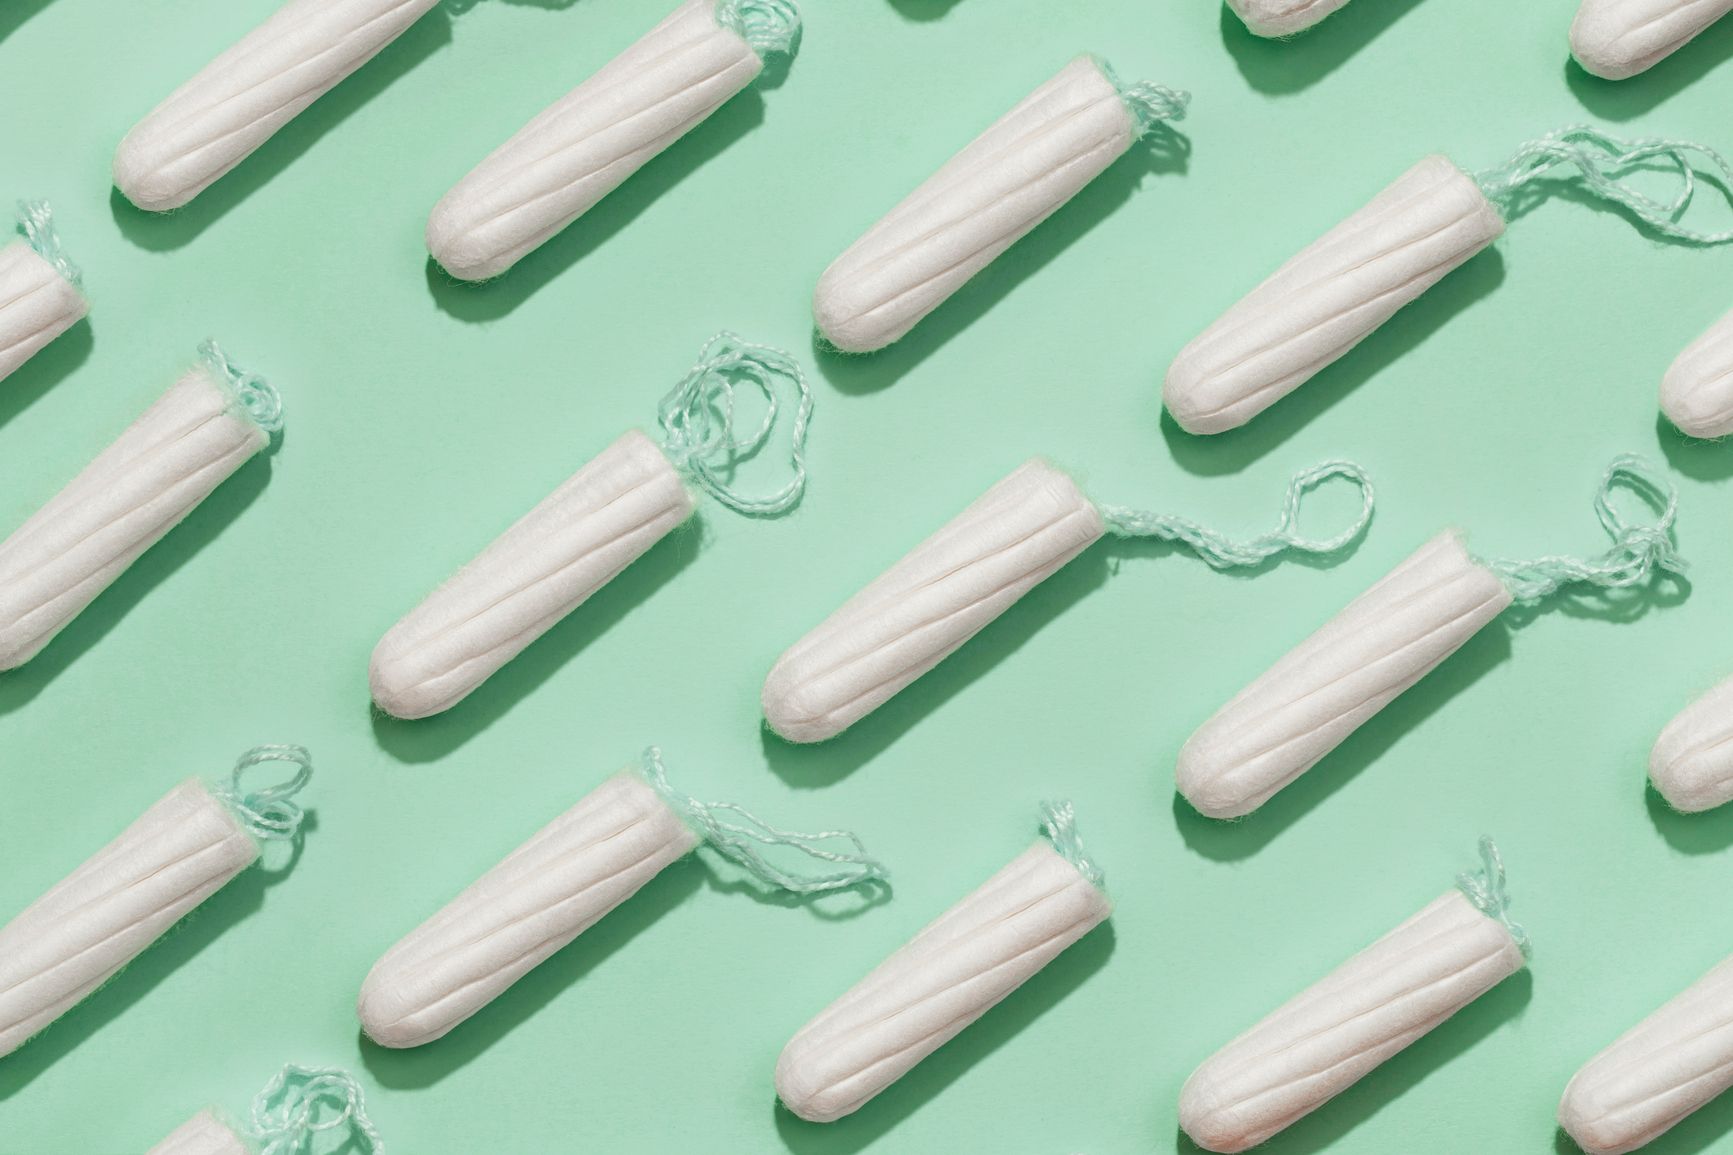 20 Ways Using Tampons Wrong — How To Use a Tampon, How To In a Tampon